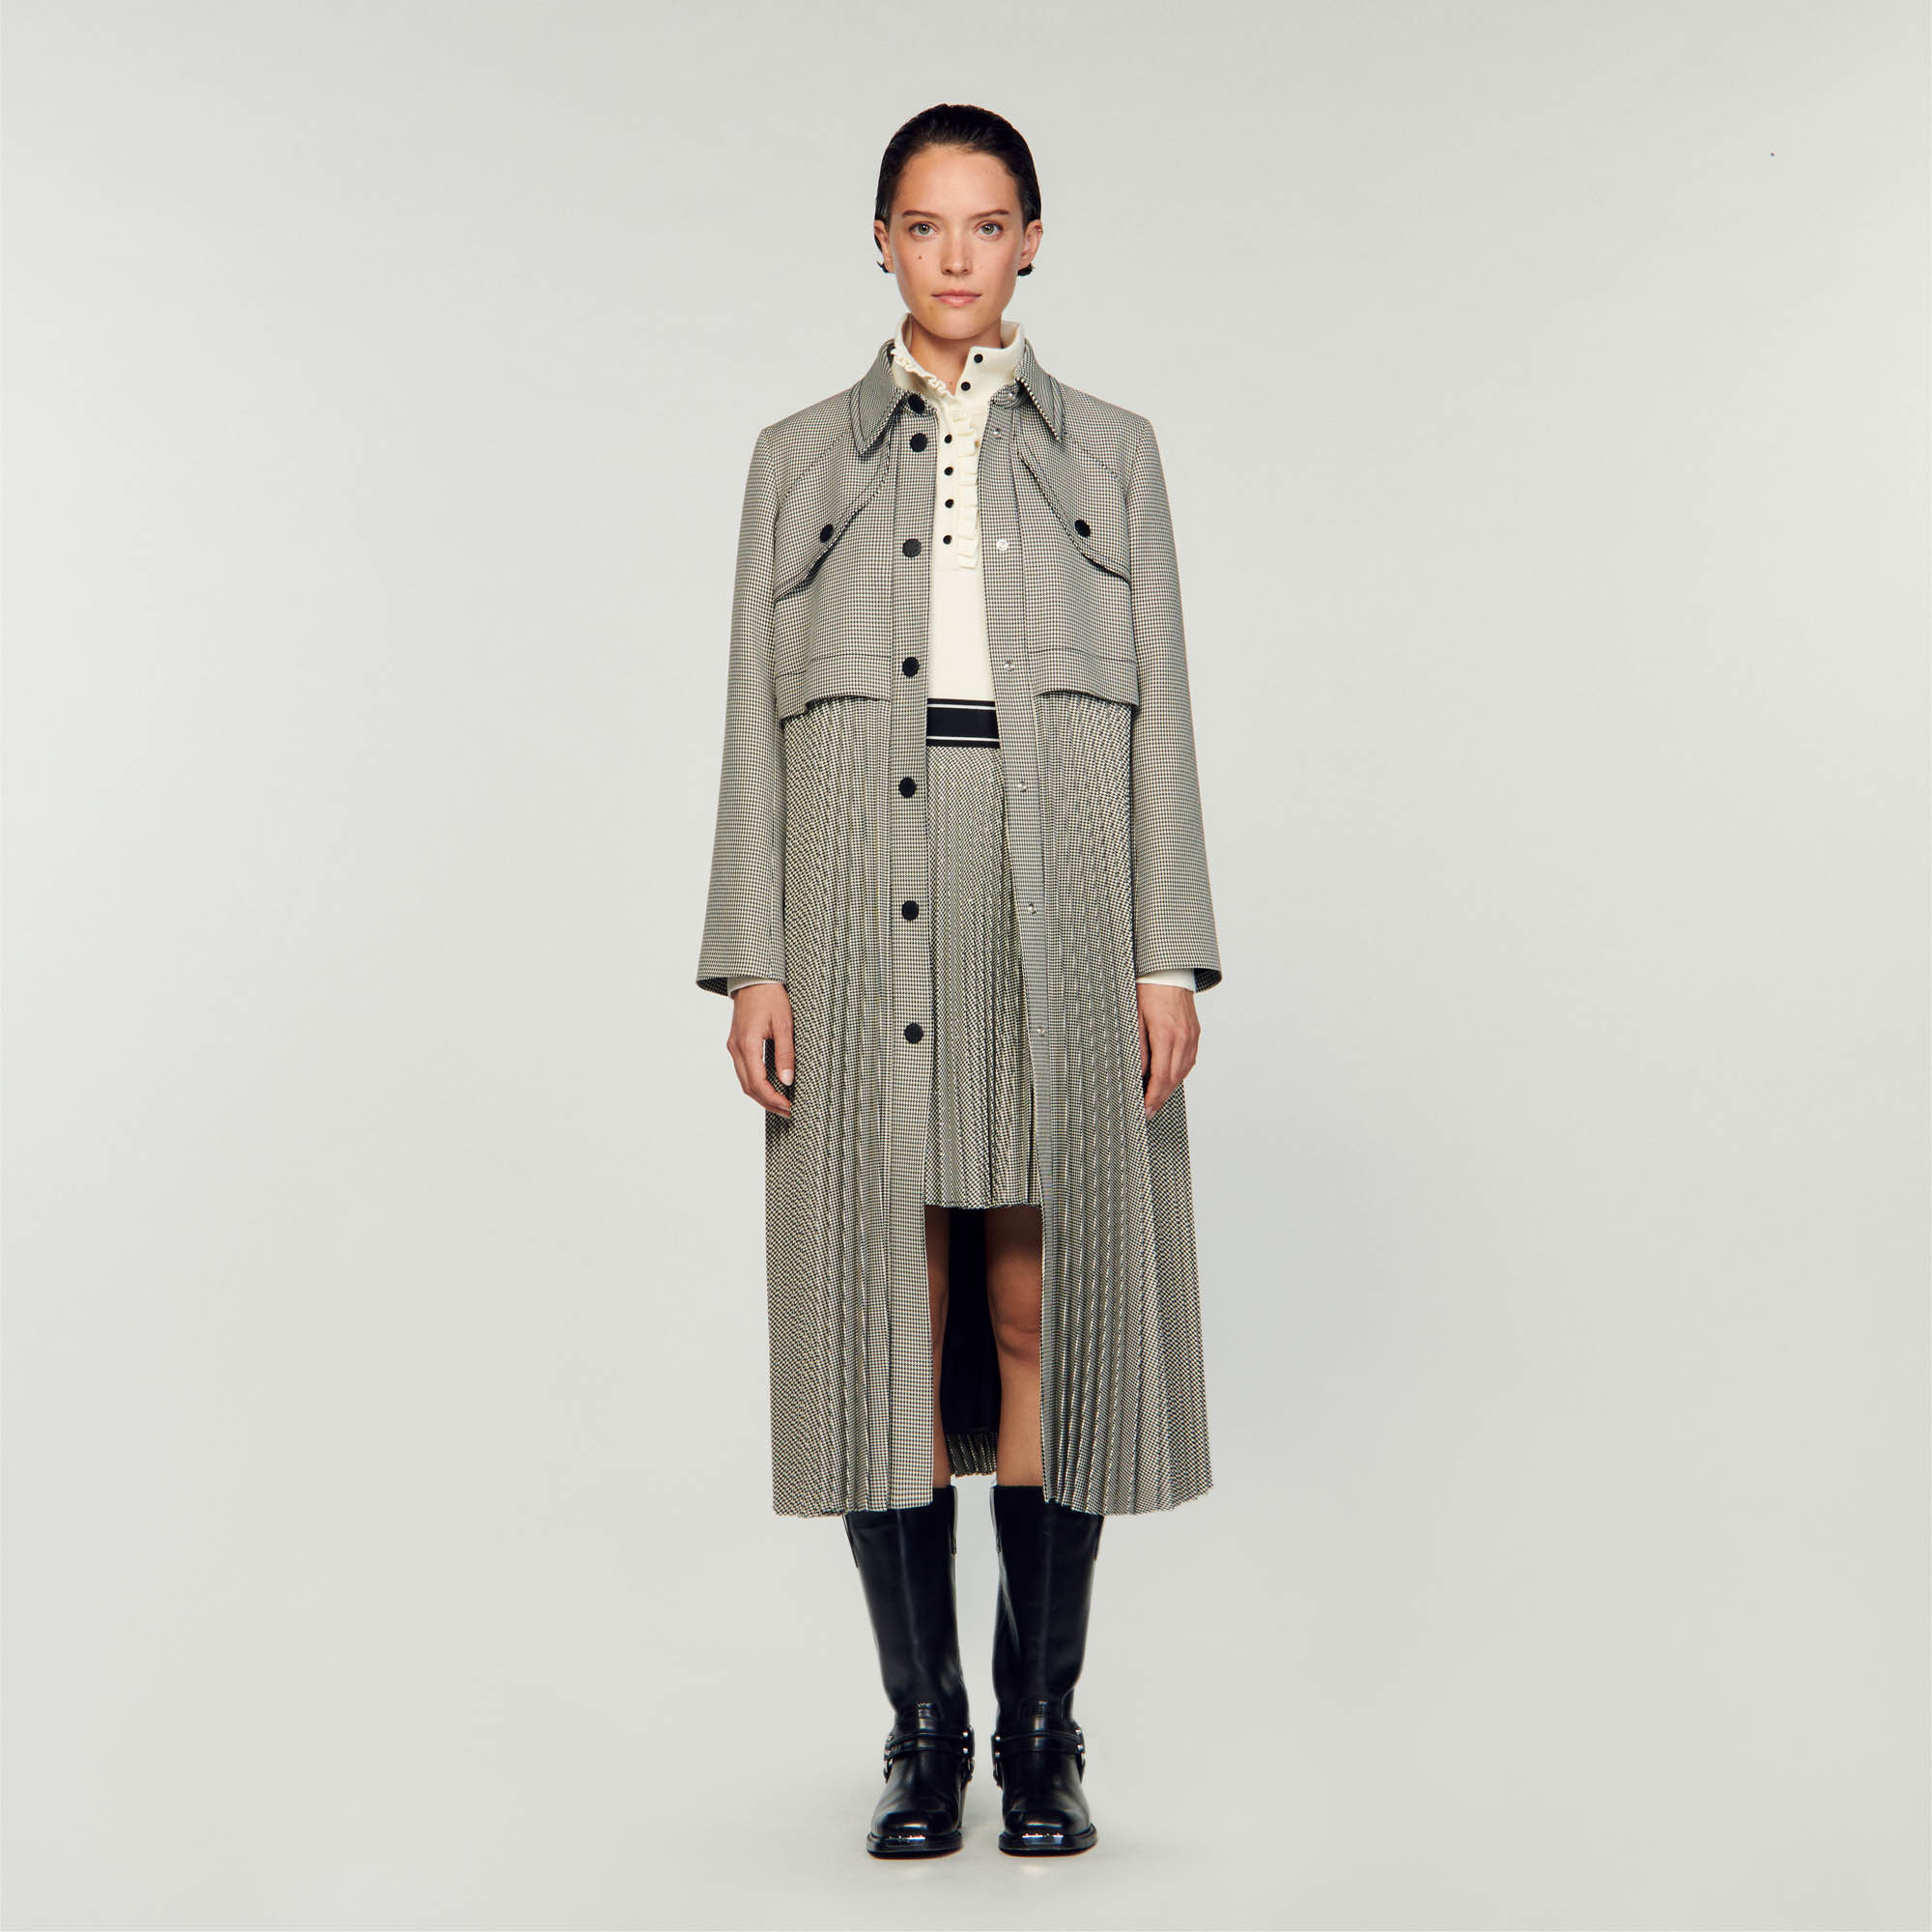 Sandro polyester Lining: Long trench coat with houndstooth pattern, embellished with pleated yokes, removable belt, long sleeves with tab cuffs, Sandro stamped press-stud fastening, flap hem and slit pockets on the sides